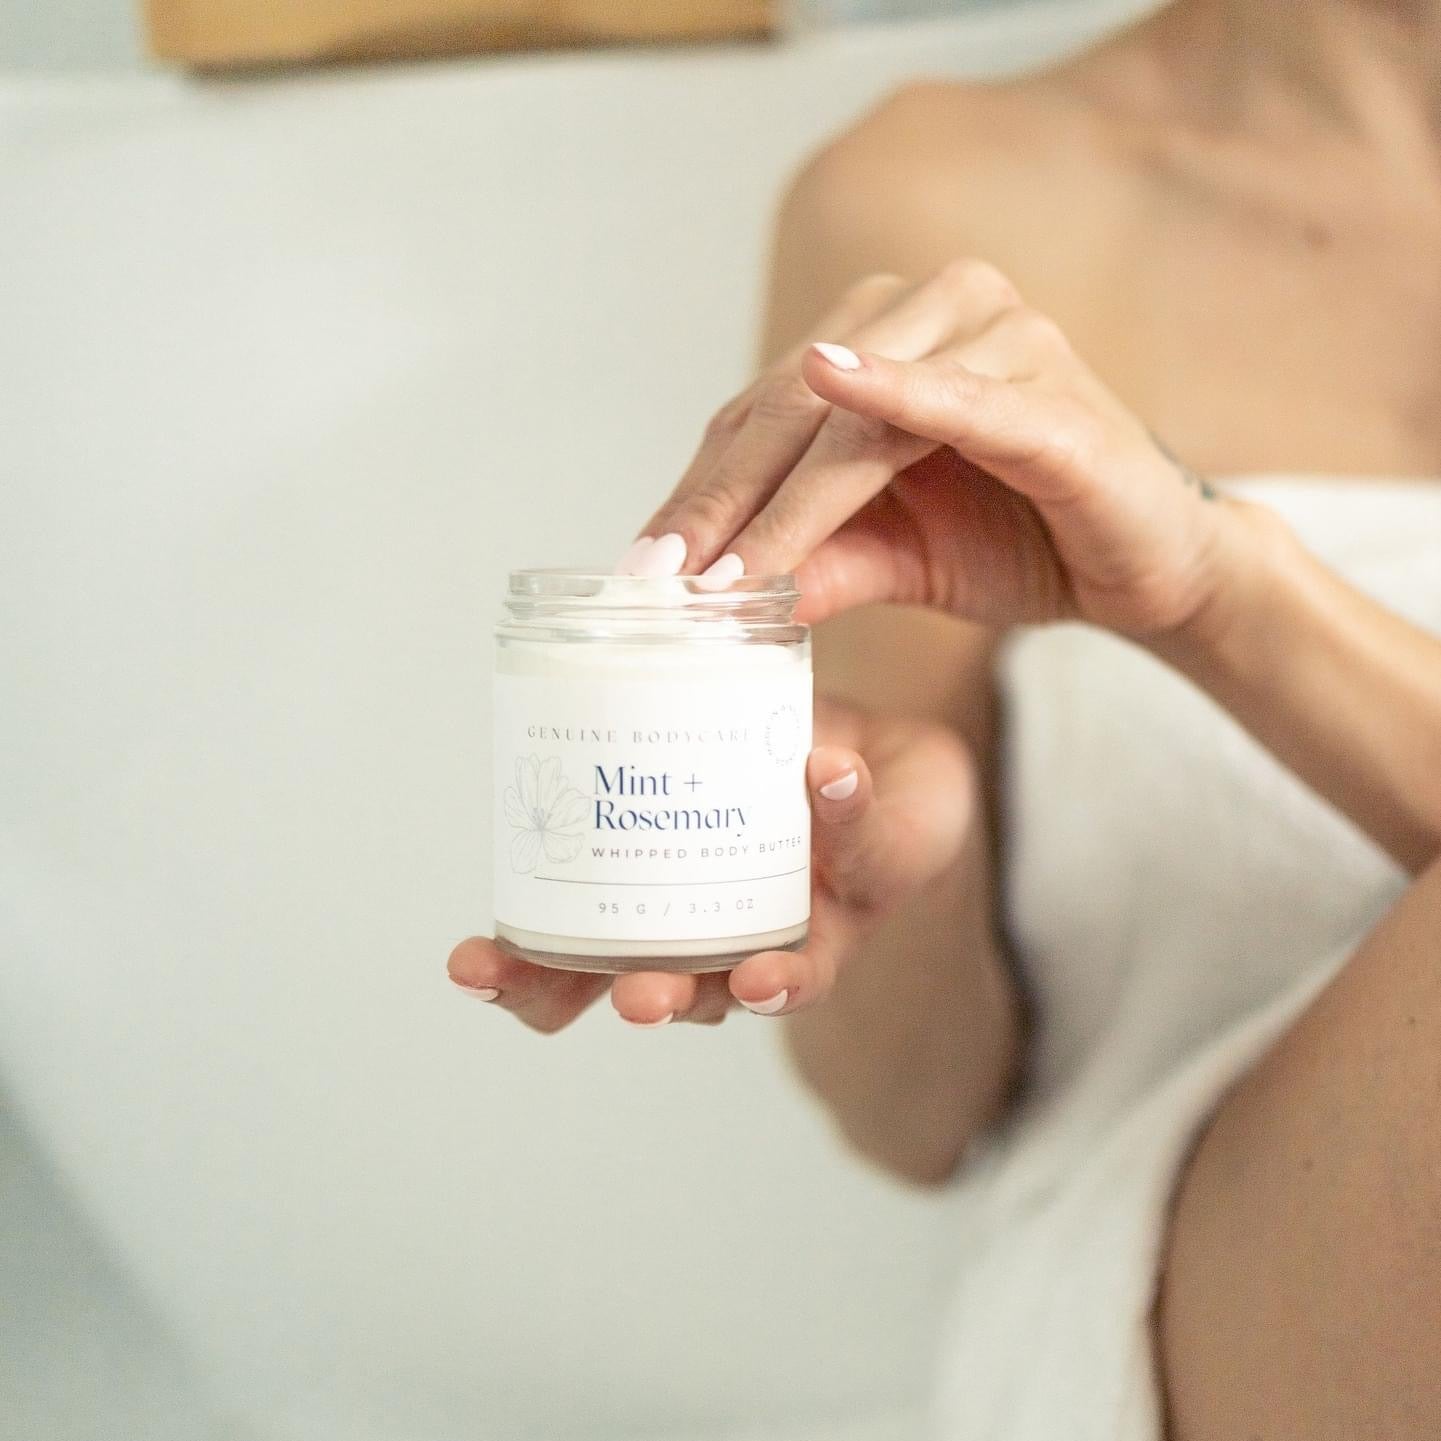 Genuine Bodycare -Whipped Body Butter